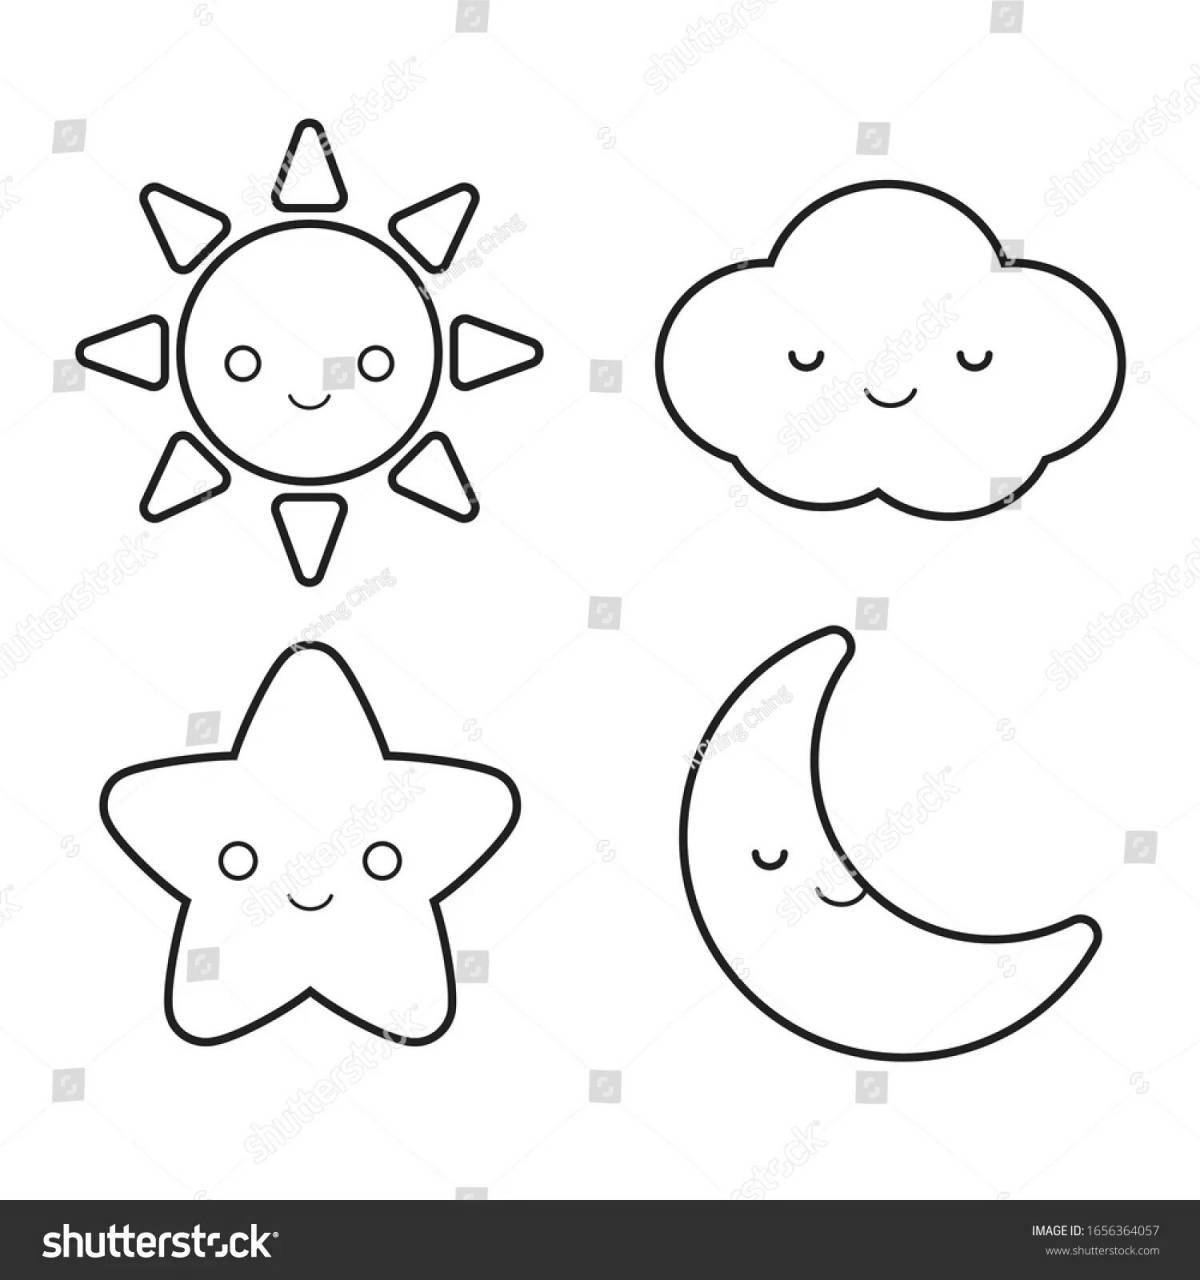 Great coloring book moon and sun for kids